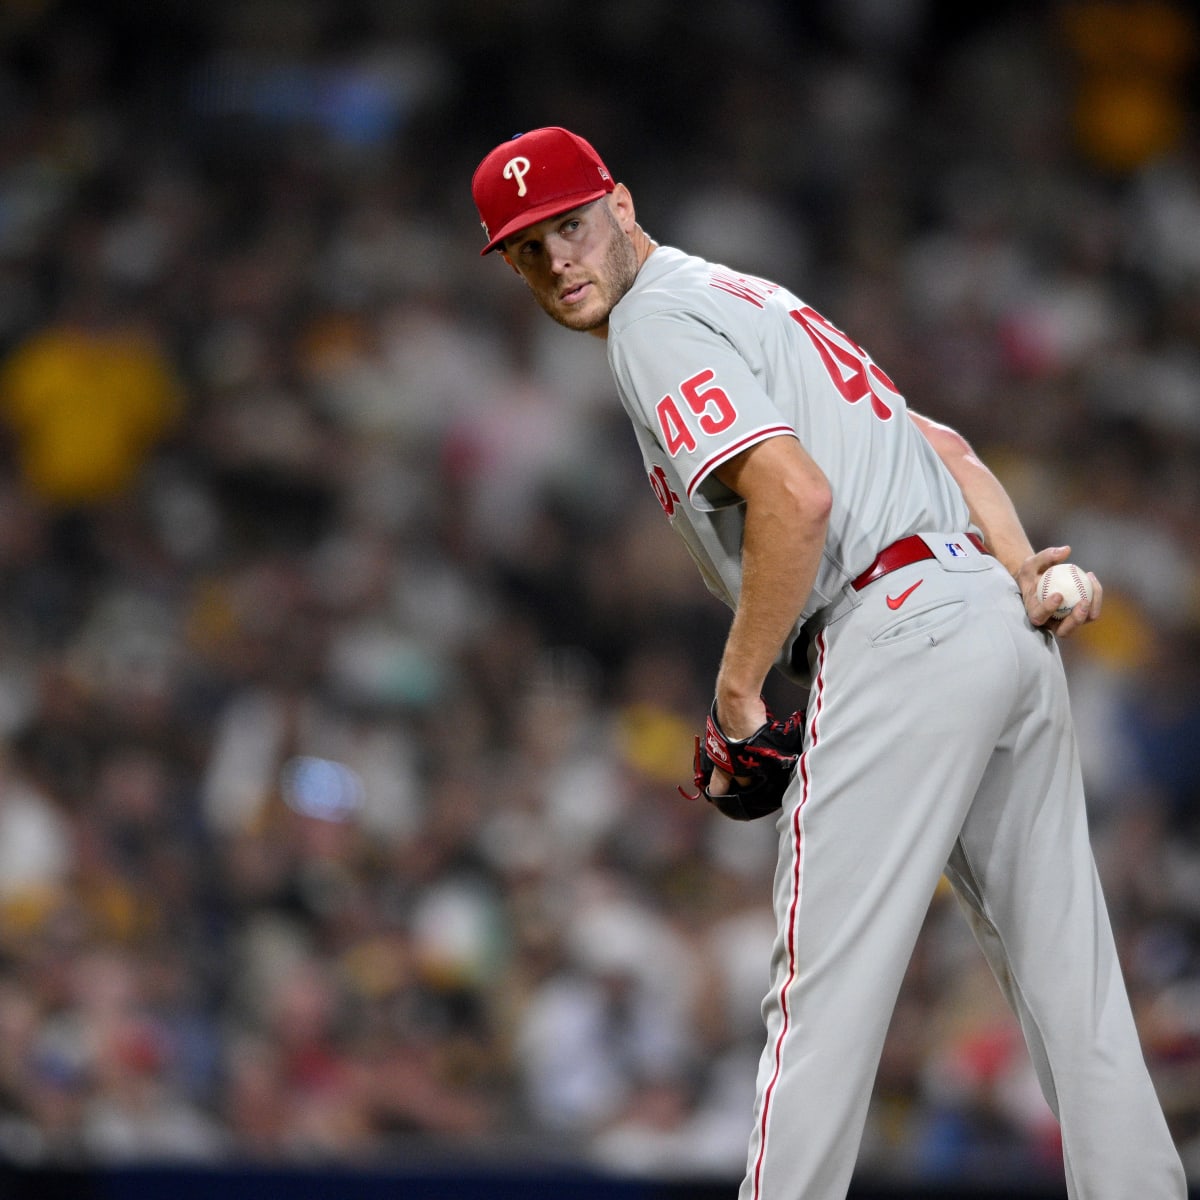 Phillies Win Game 1 of NLCS behind Zack Wheeler's Dominant